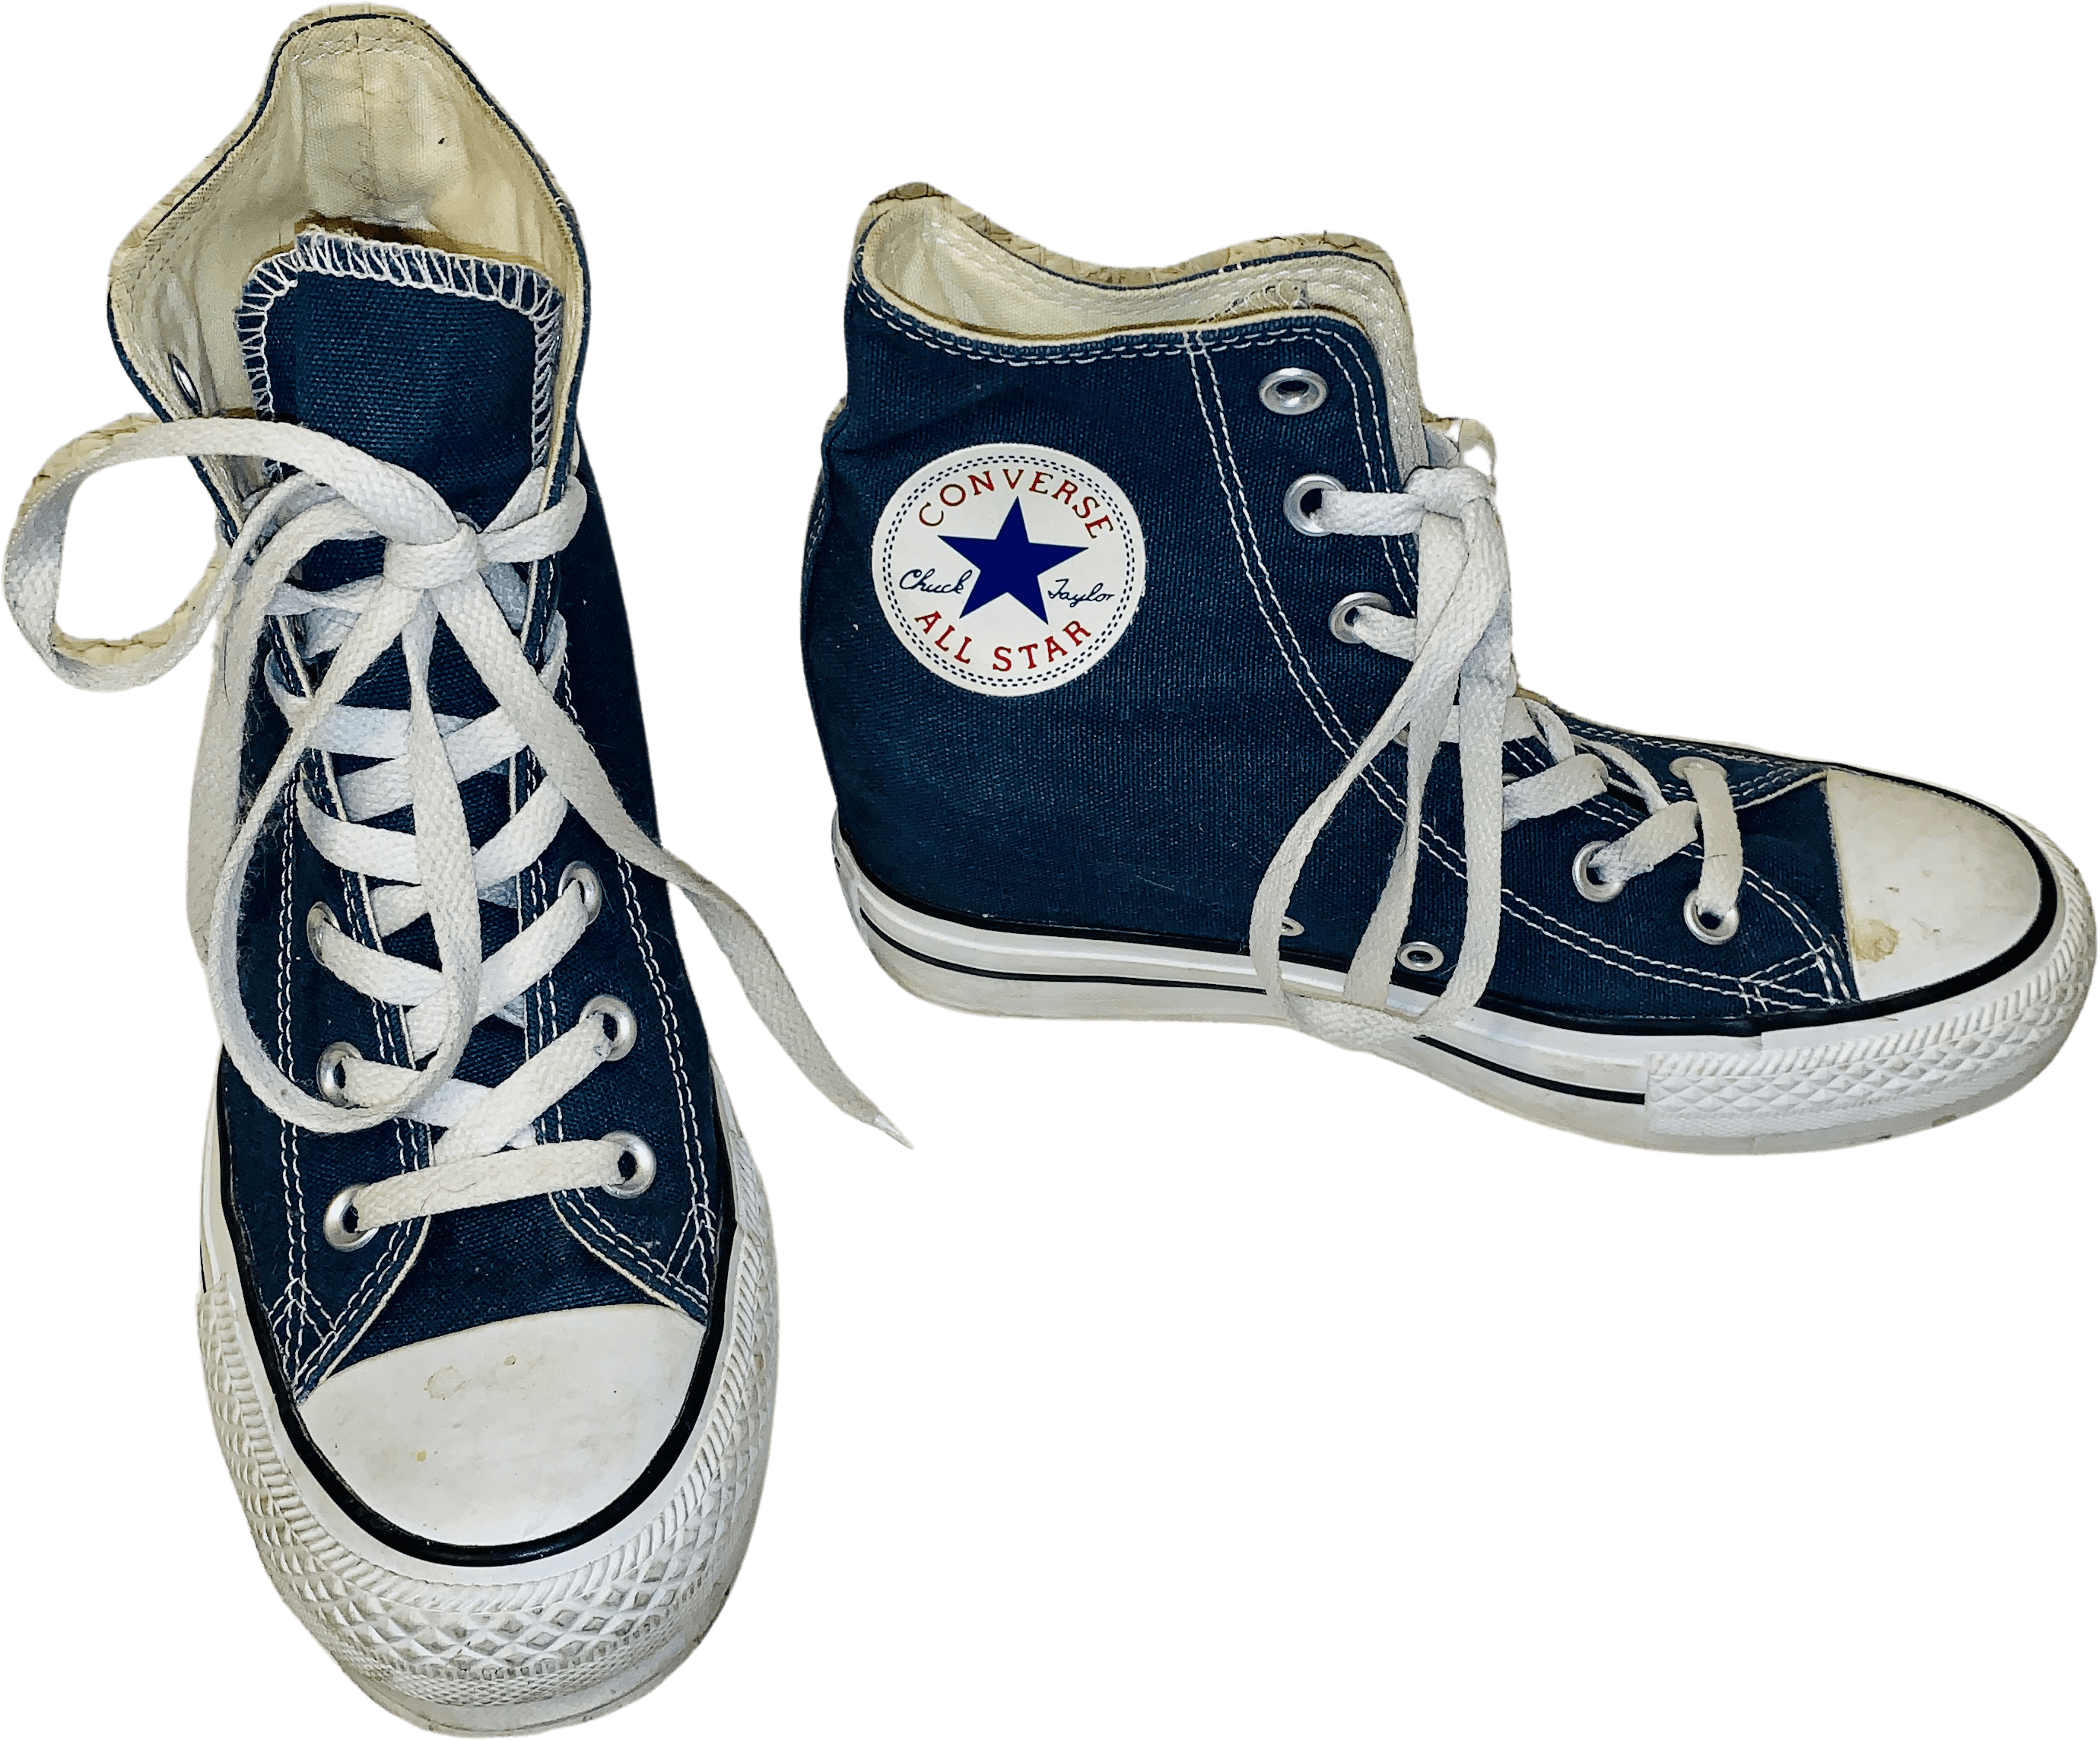 Vintage 00's Converse Allstar Navy Blue Wedge Sneakers by Converse ...